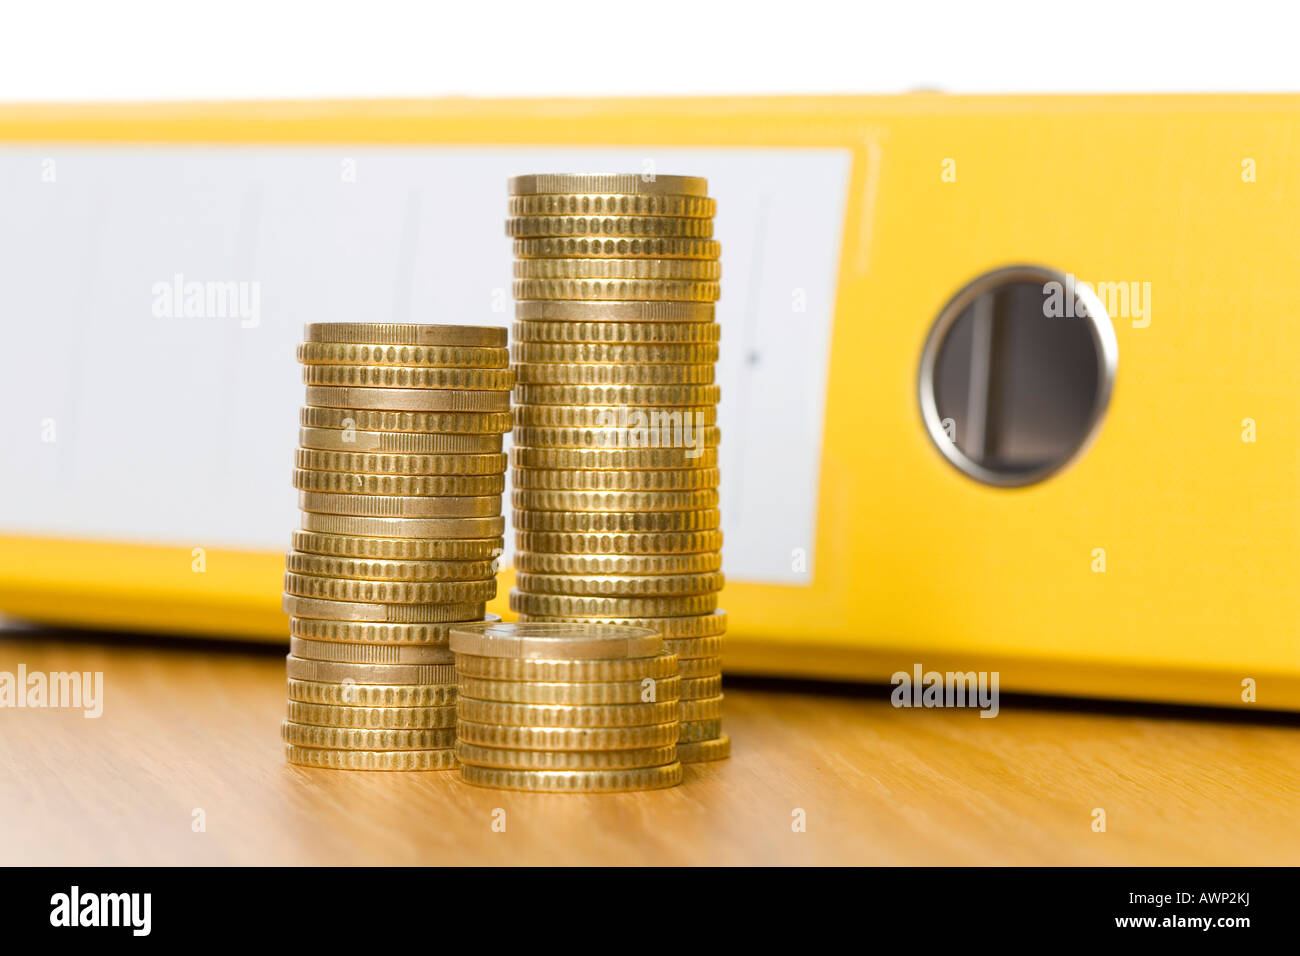 Coins stacked in front of a file folder Stock Photo